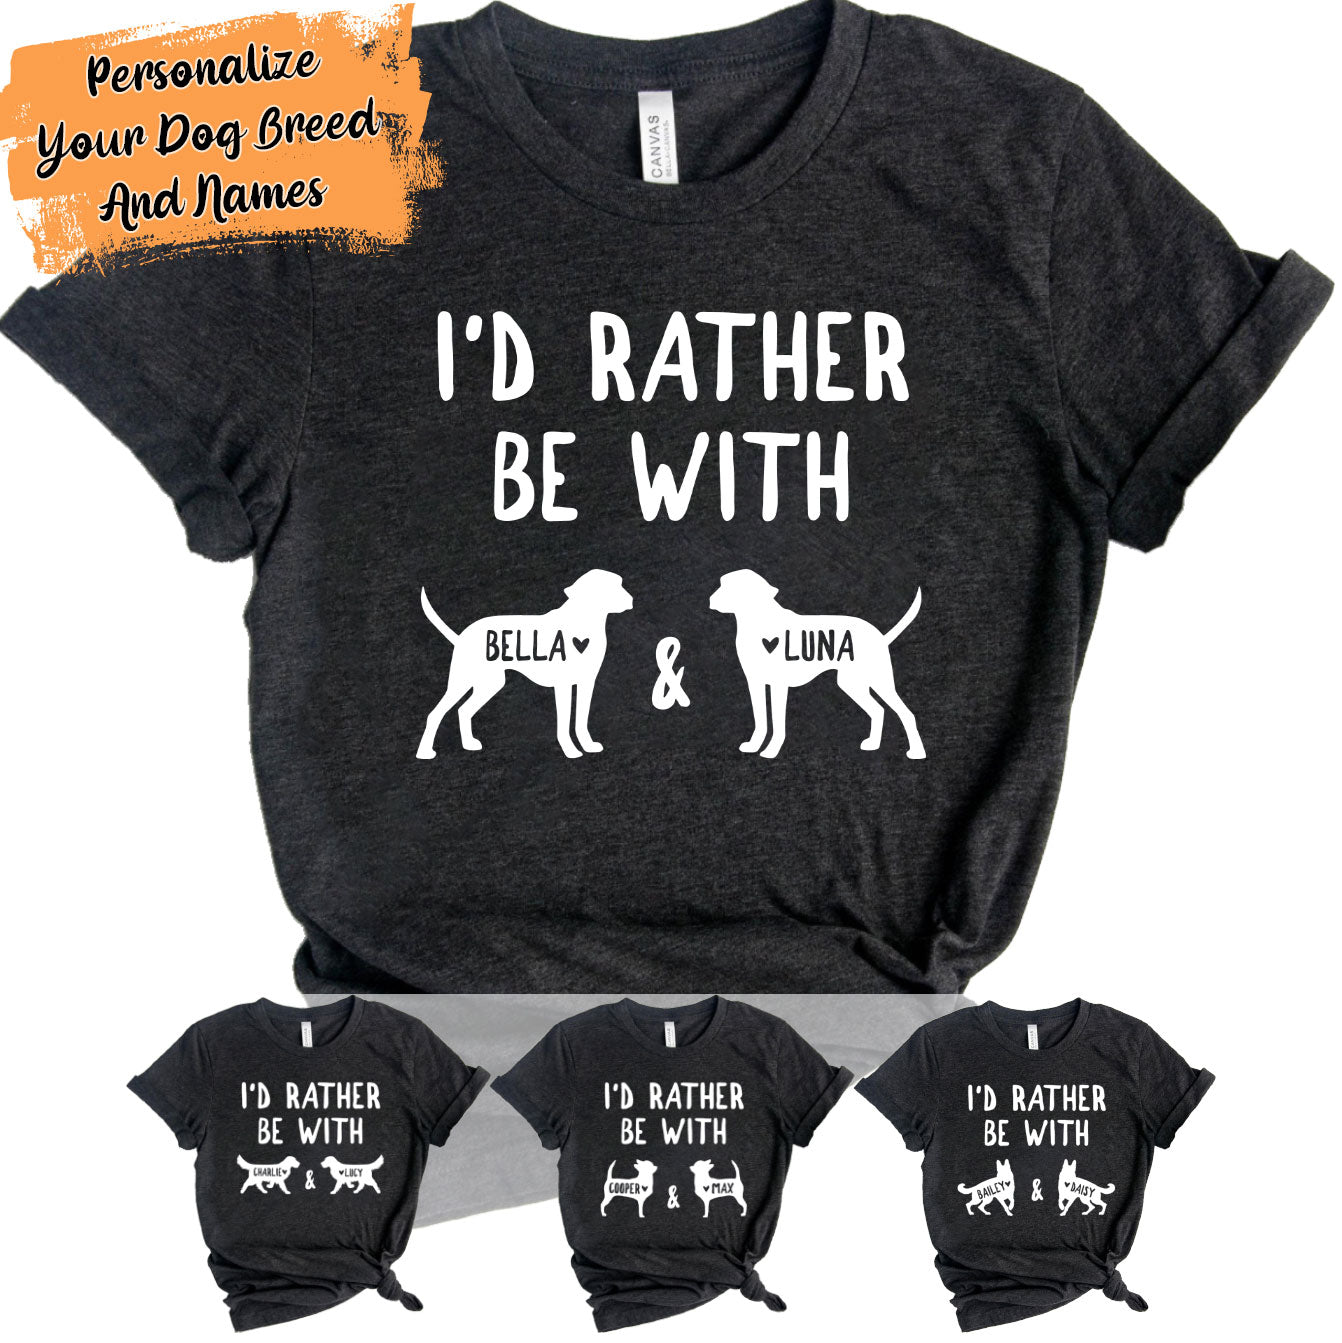 I’d Rather Be With “Dog Names” Personalized T-Shirt